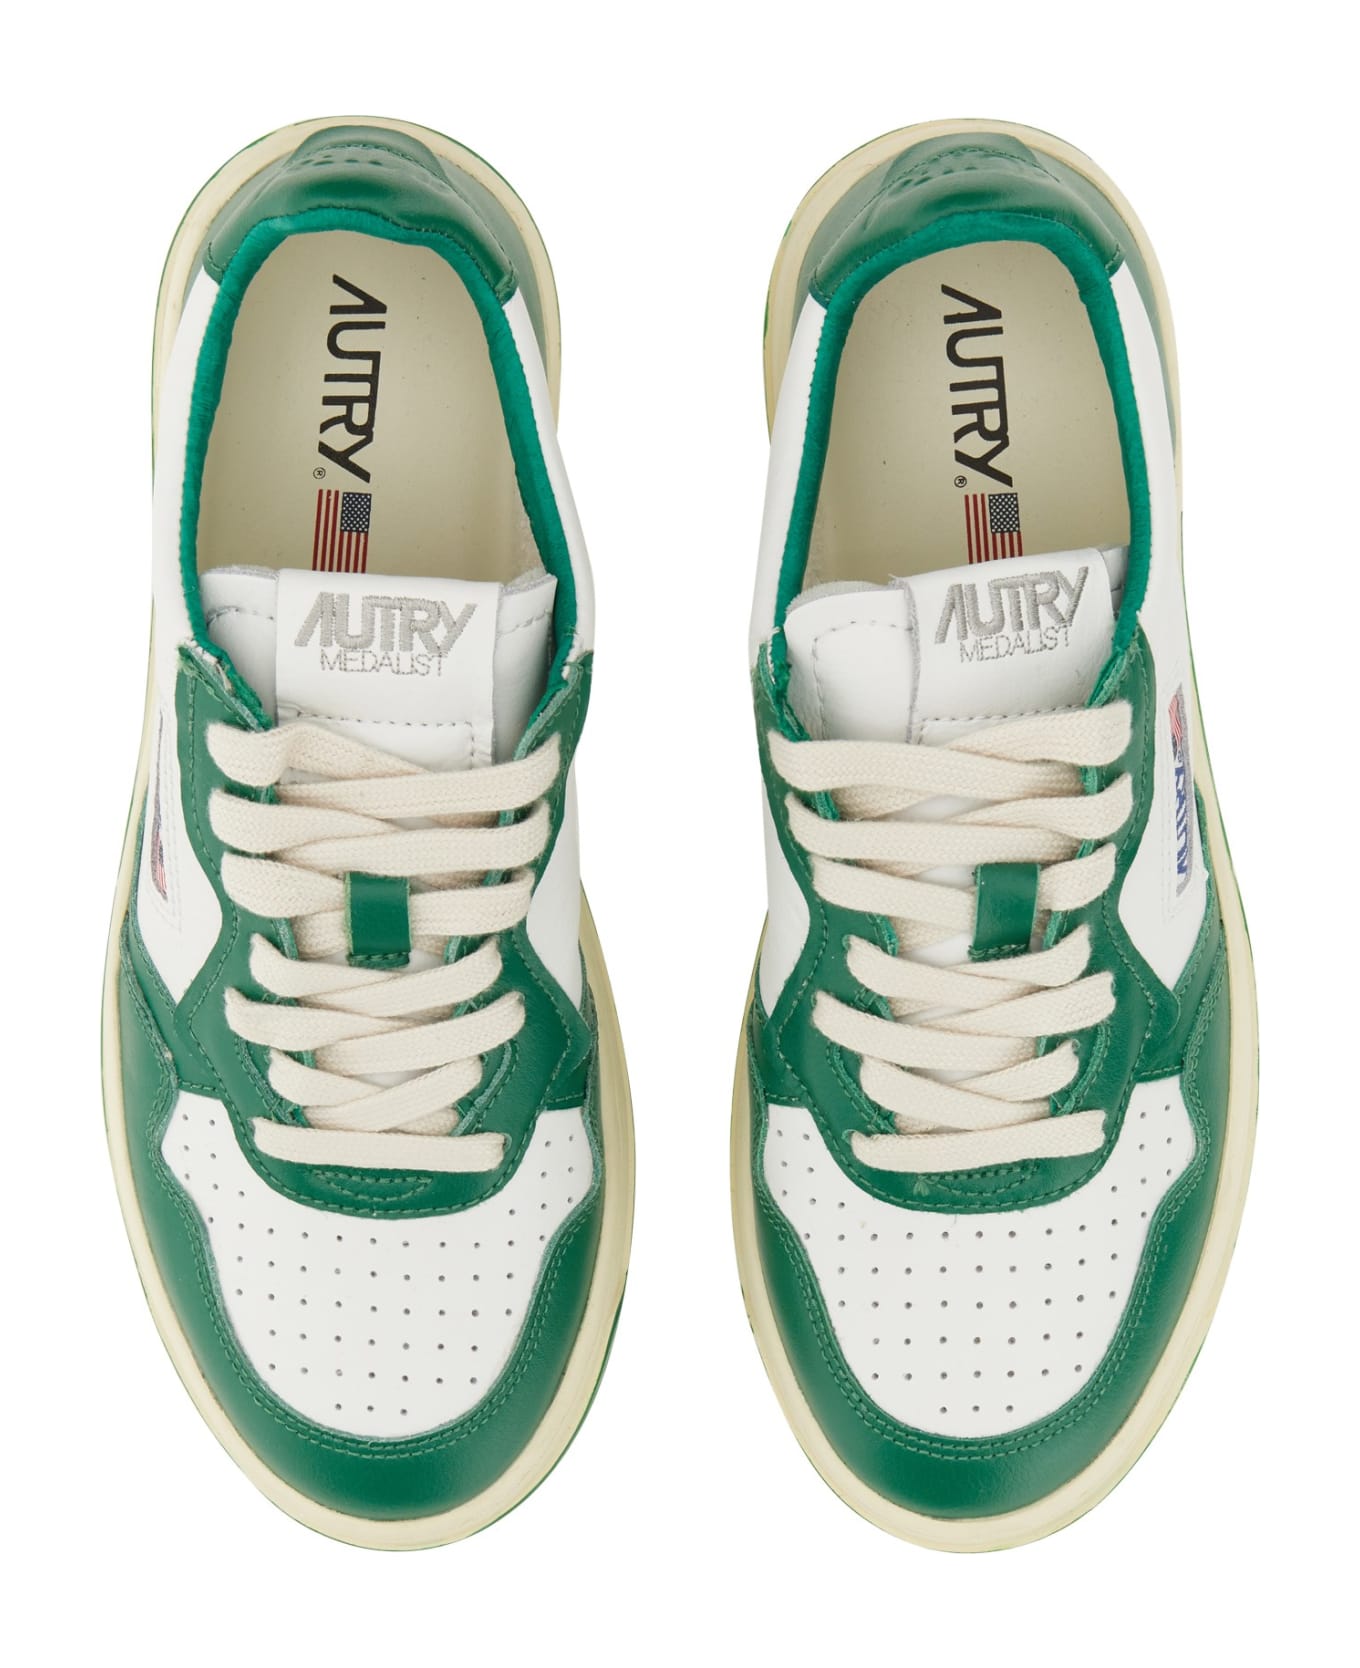 Autry Leather Medalist Low Sneakers - Bianco